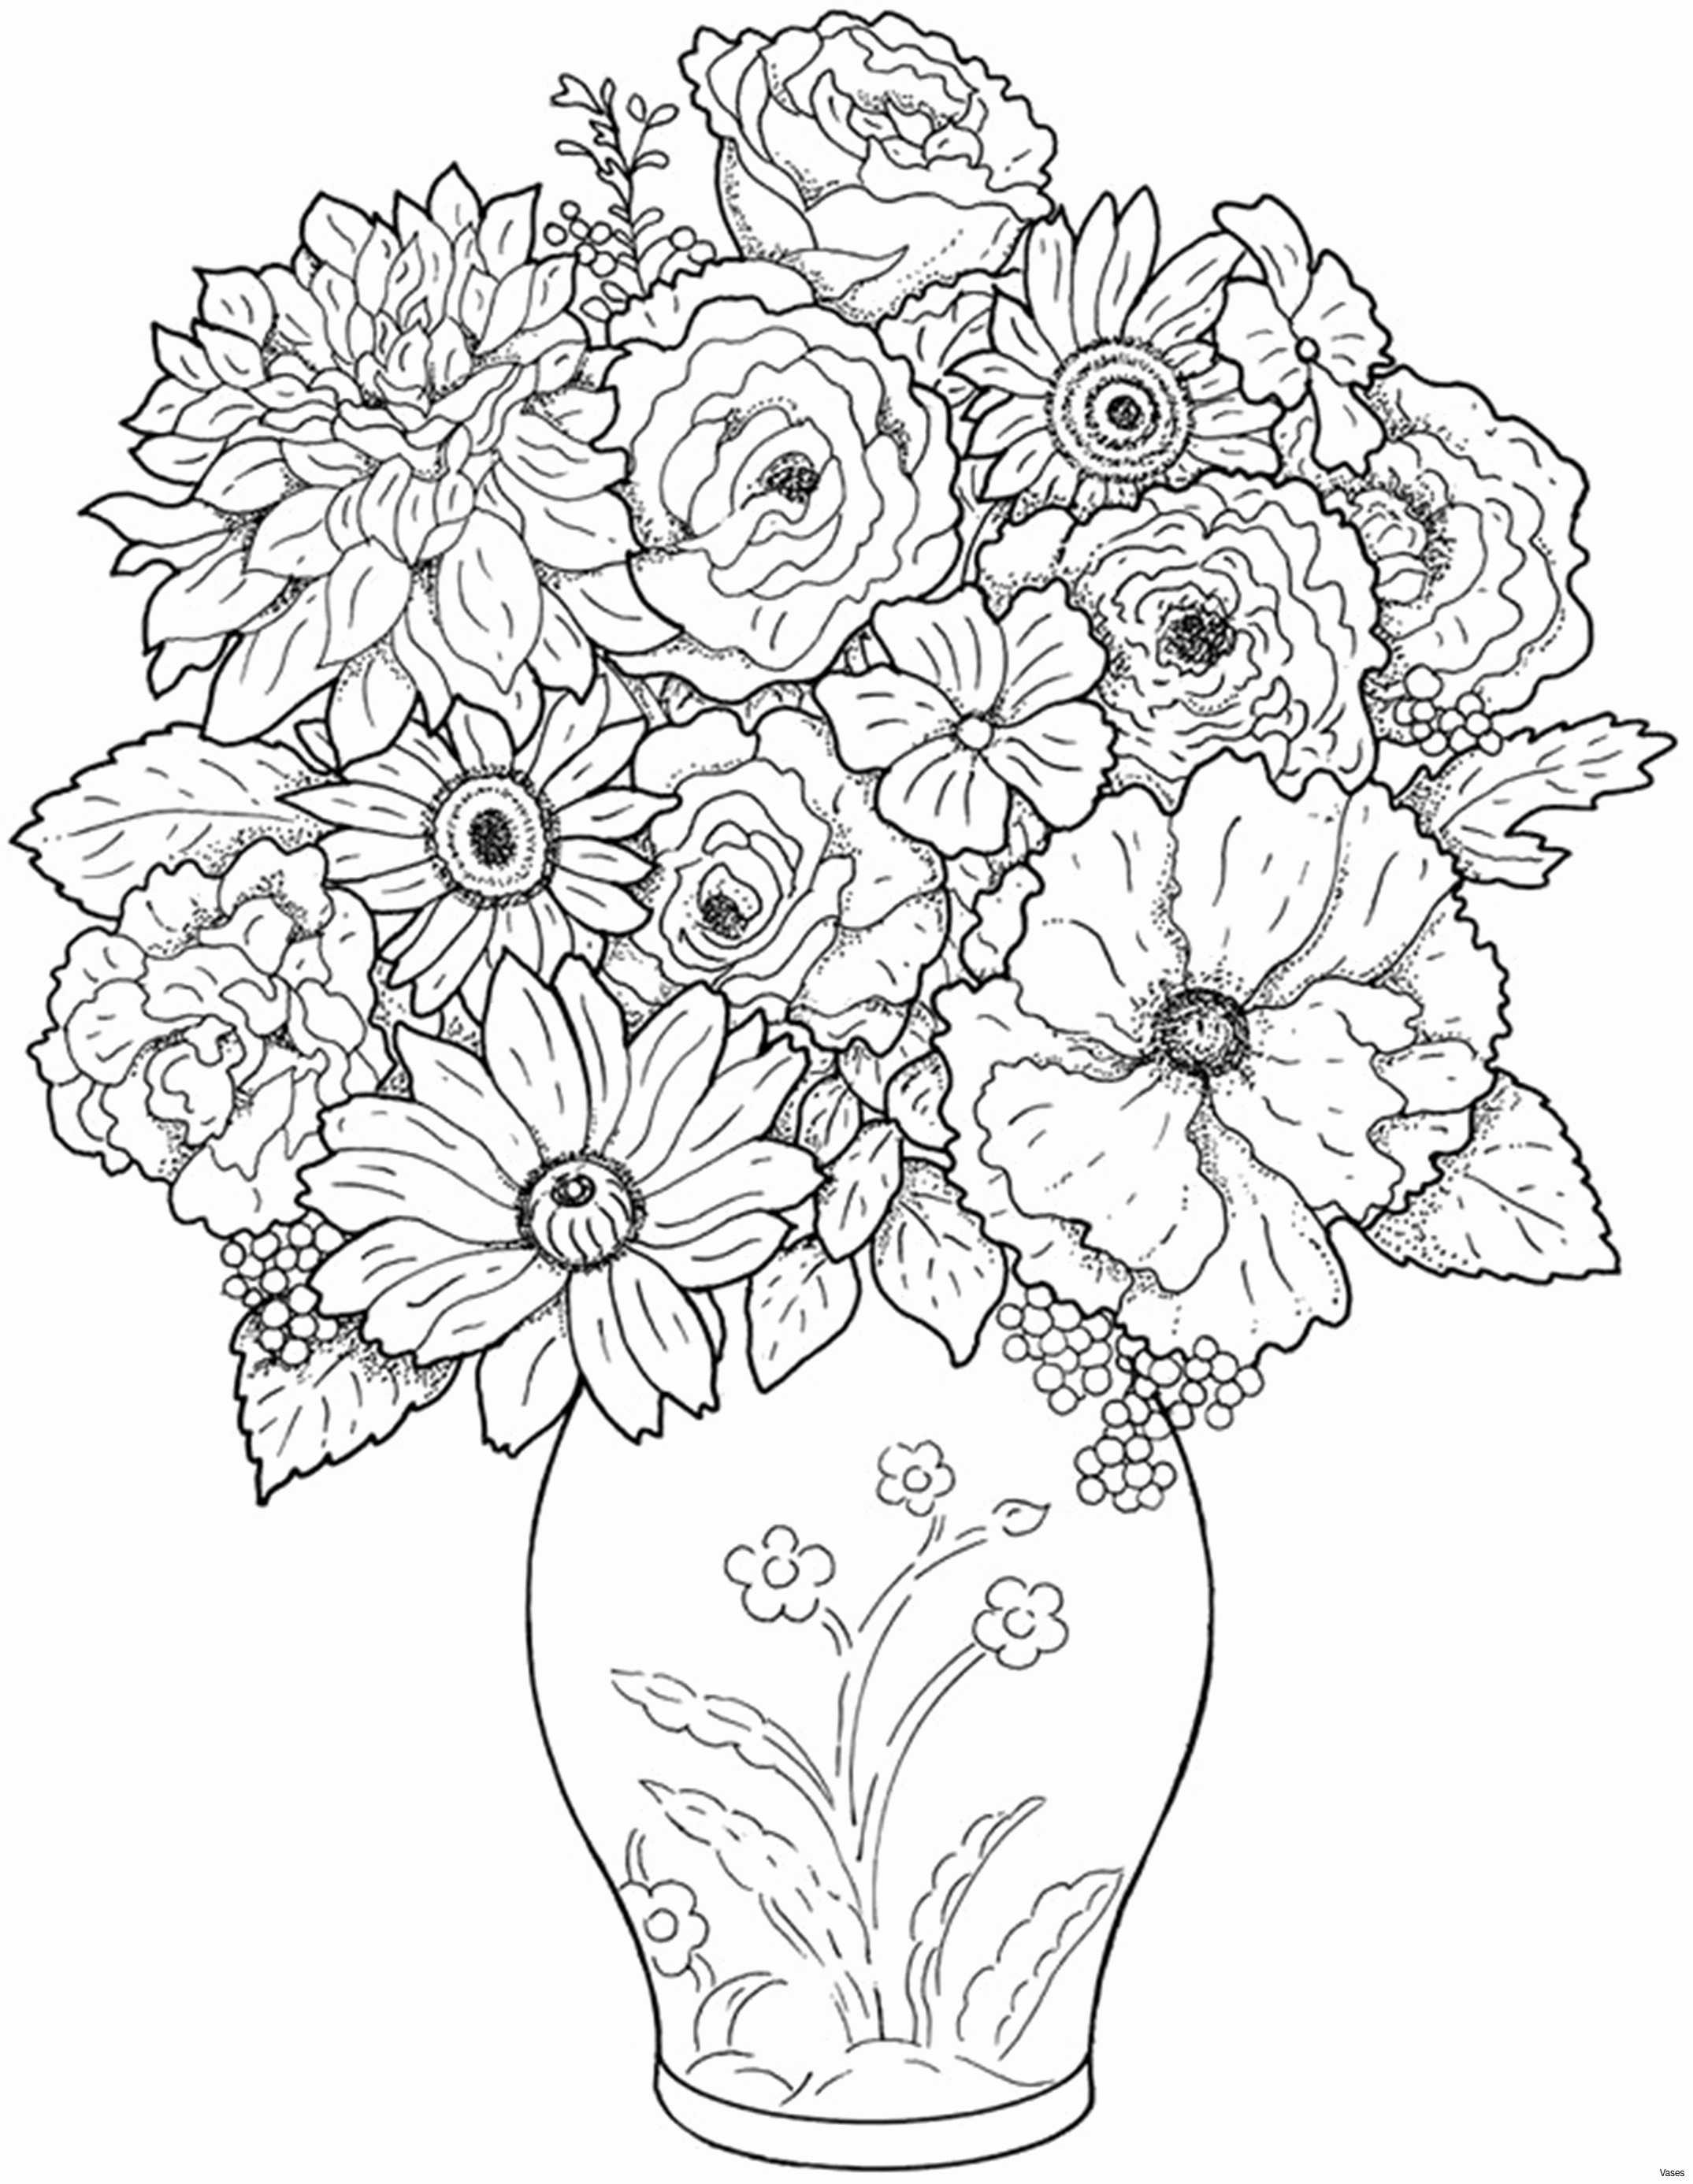 Stress Management Worksheets together with Coloring for Stress Relief Awesome Stress Relief Coloring Pages